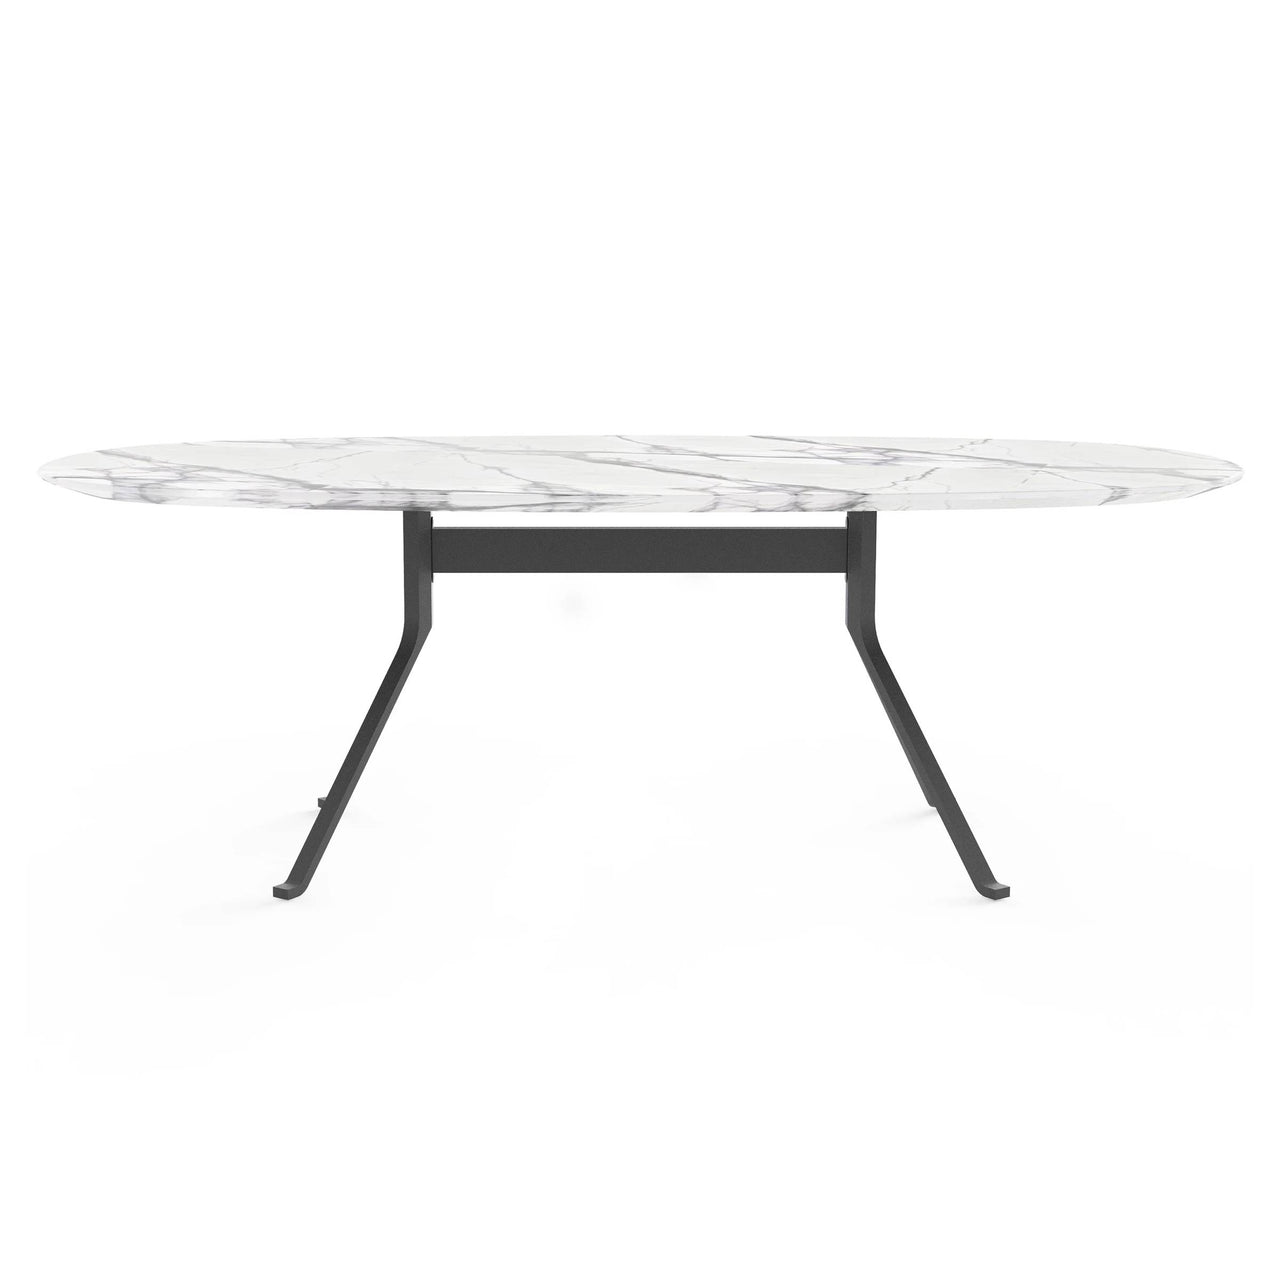 Blink Oval Dining Table: Stone Top + Lilac